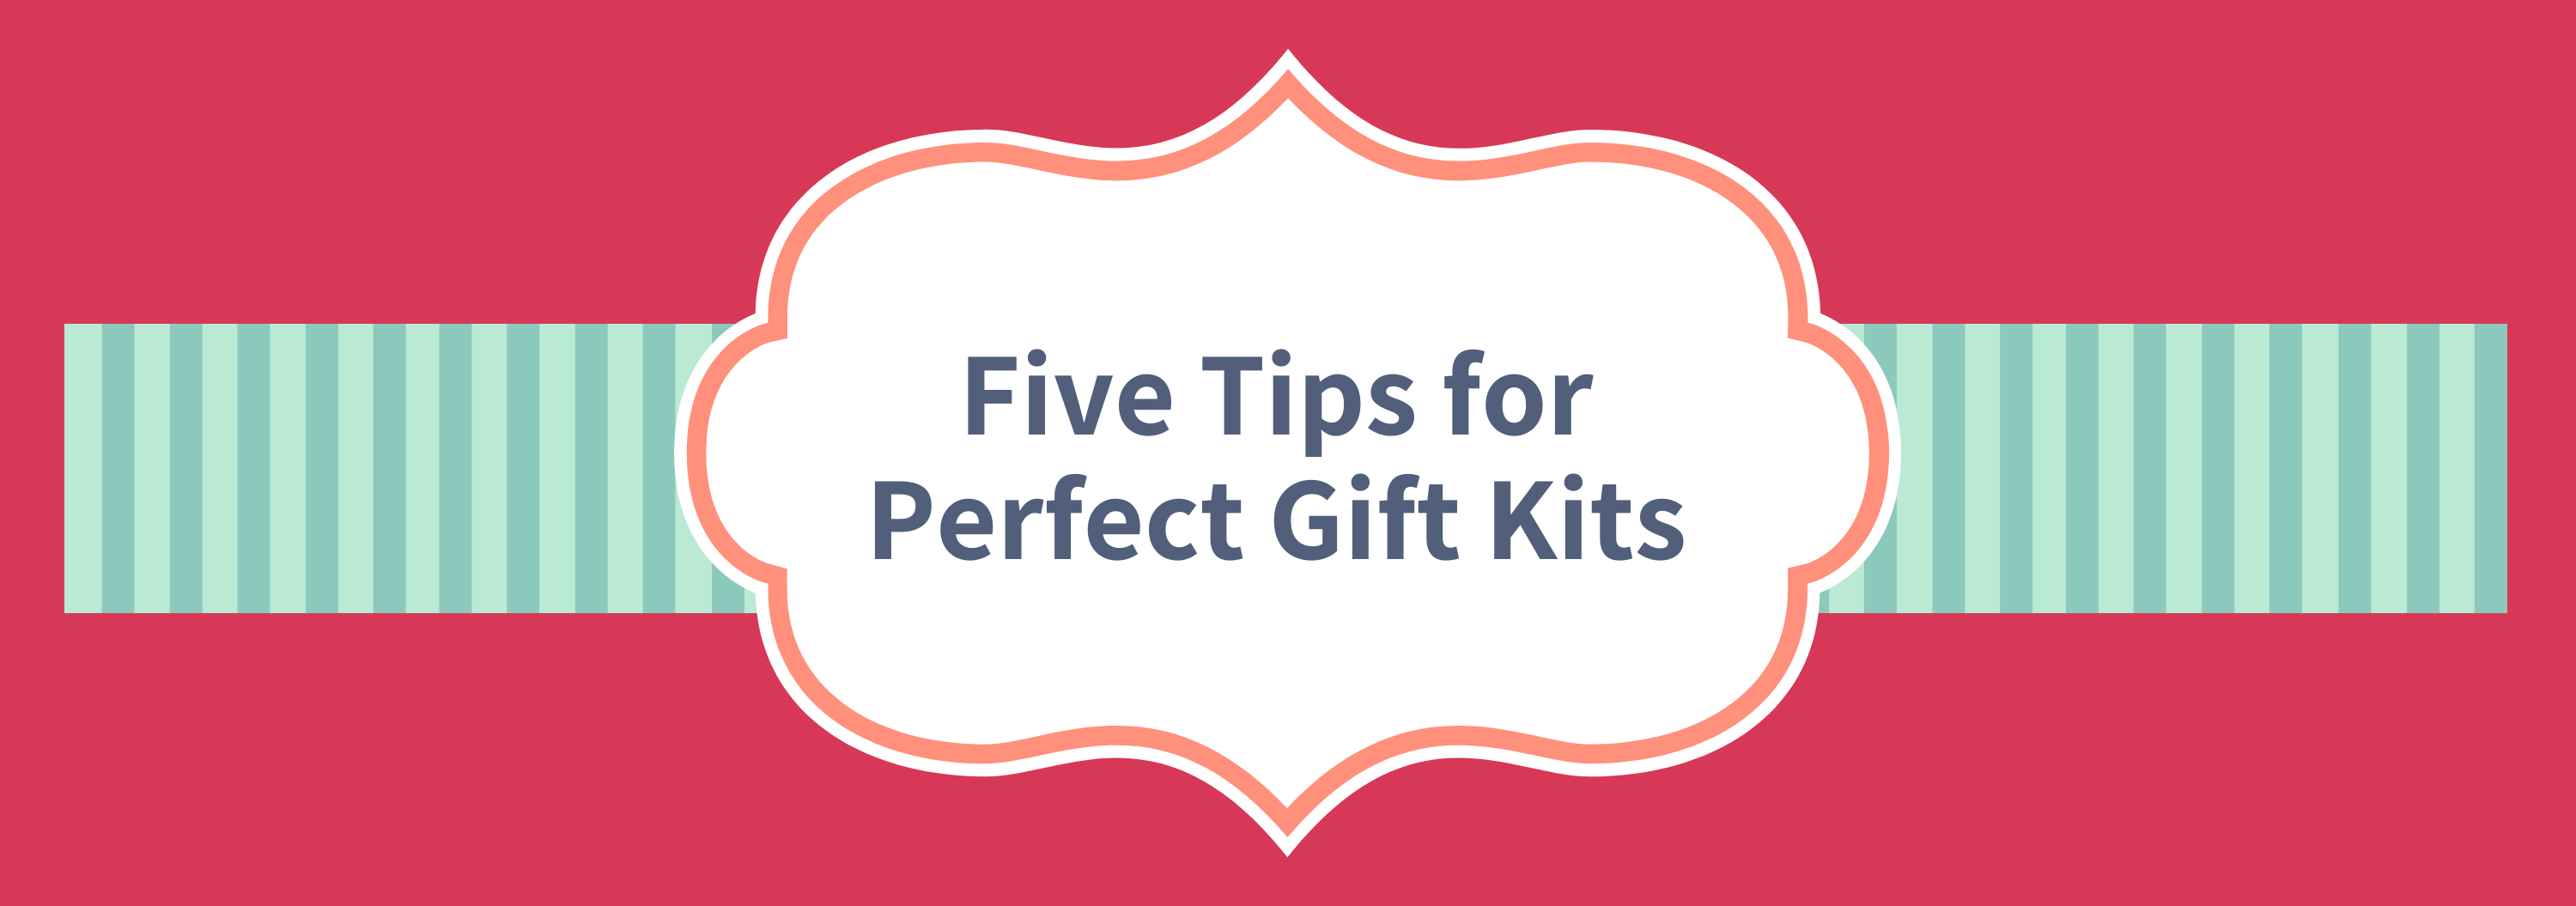 Five Tips for Perfect Gift Kits image